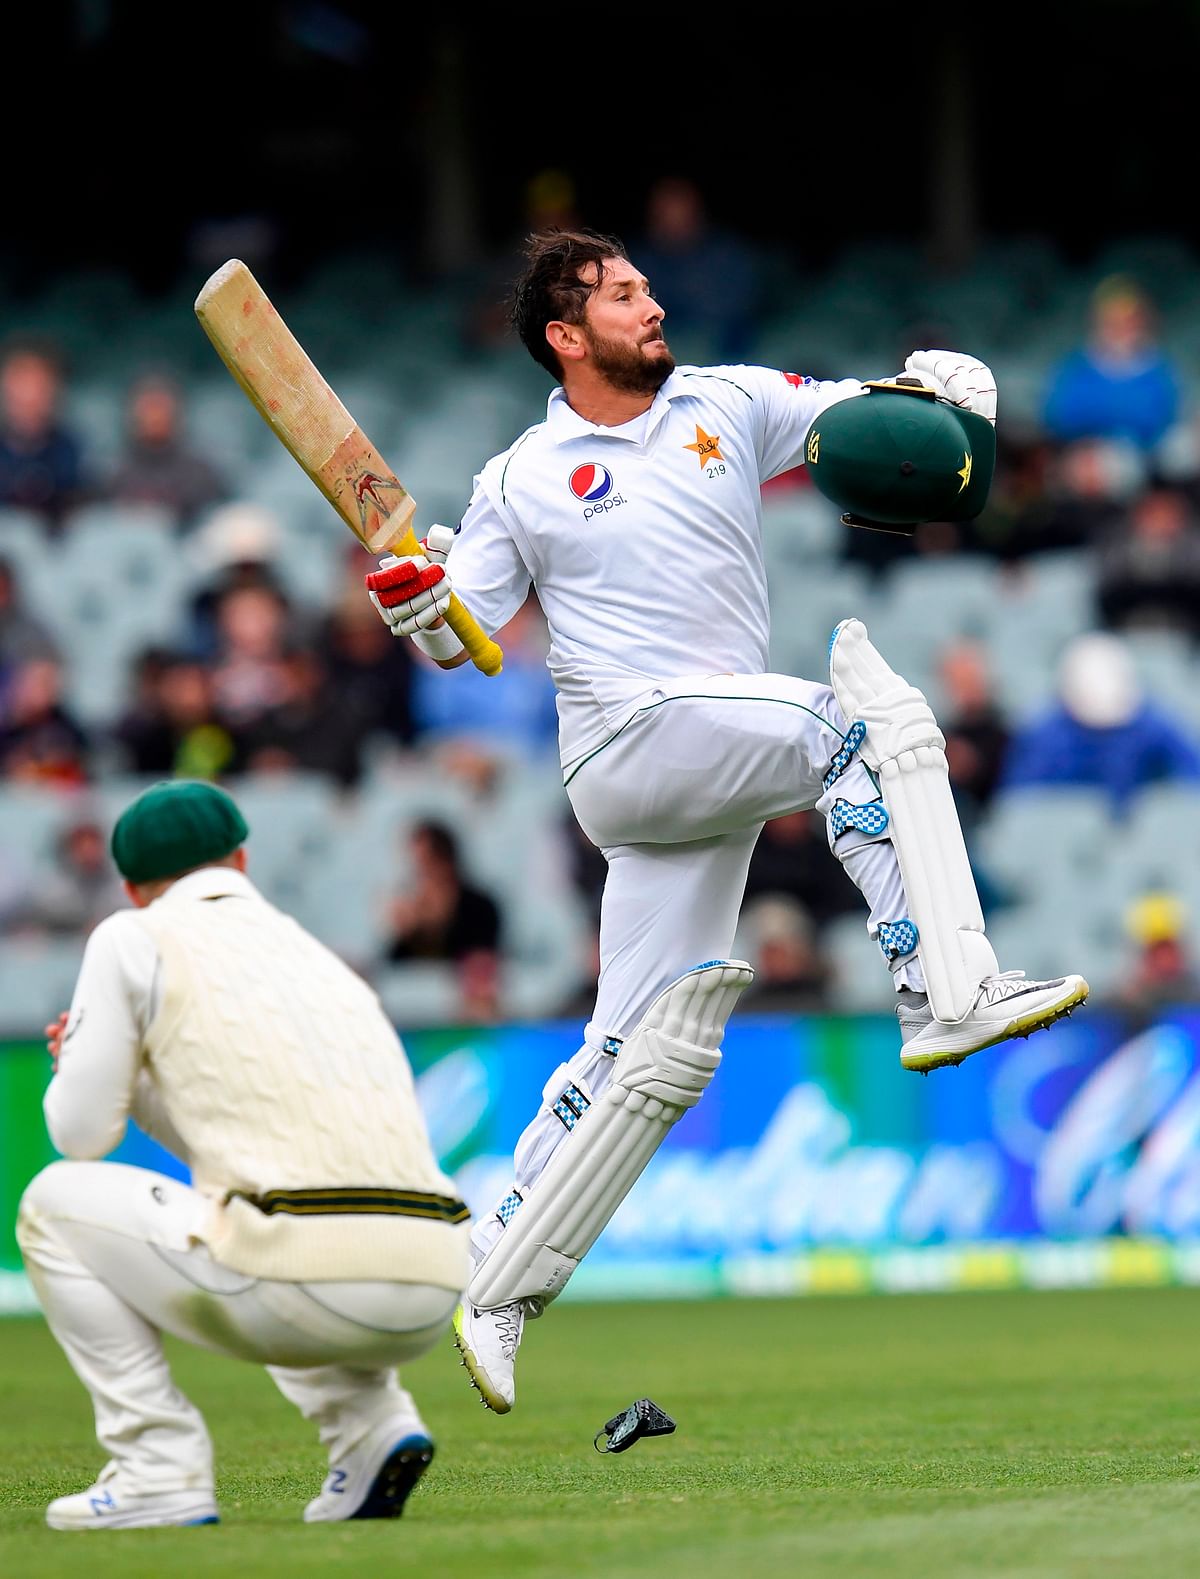 Pakistan batsman Yasir Shah celebrates scoring his century against Australia on the third day of the second cricket Test match in Adelaide on 1 December 2019. Photo: AFP